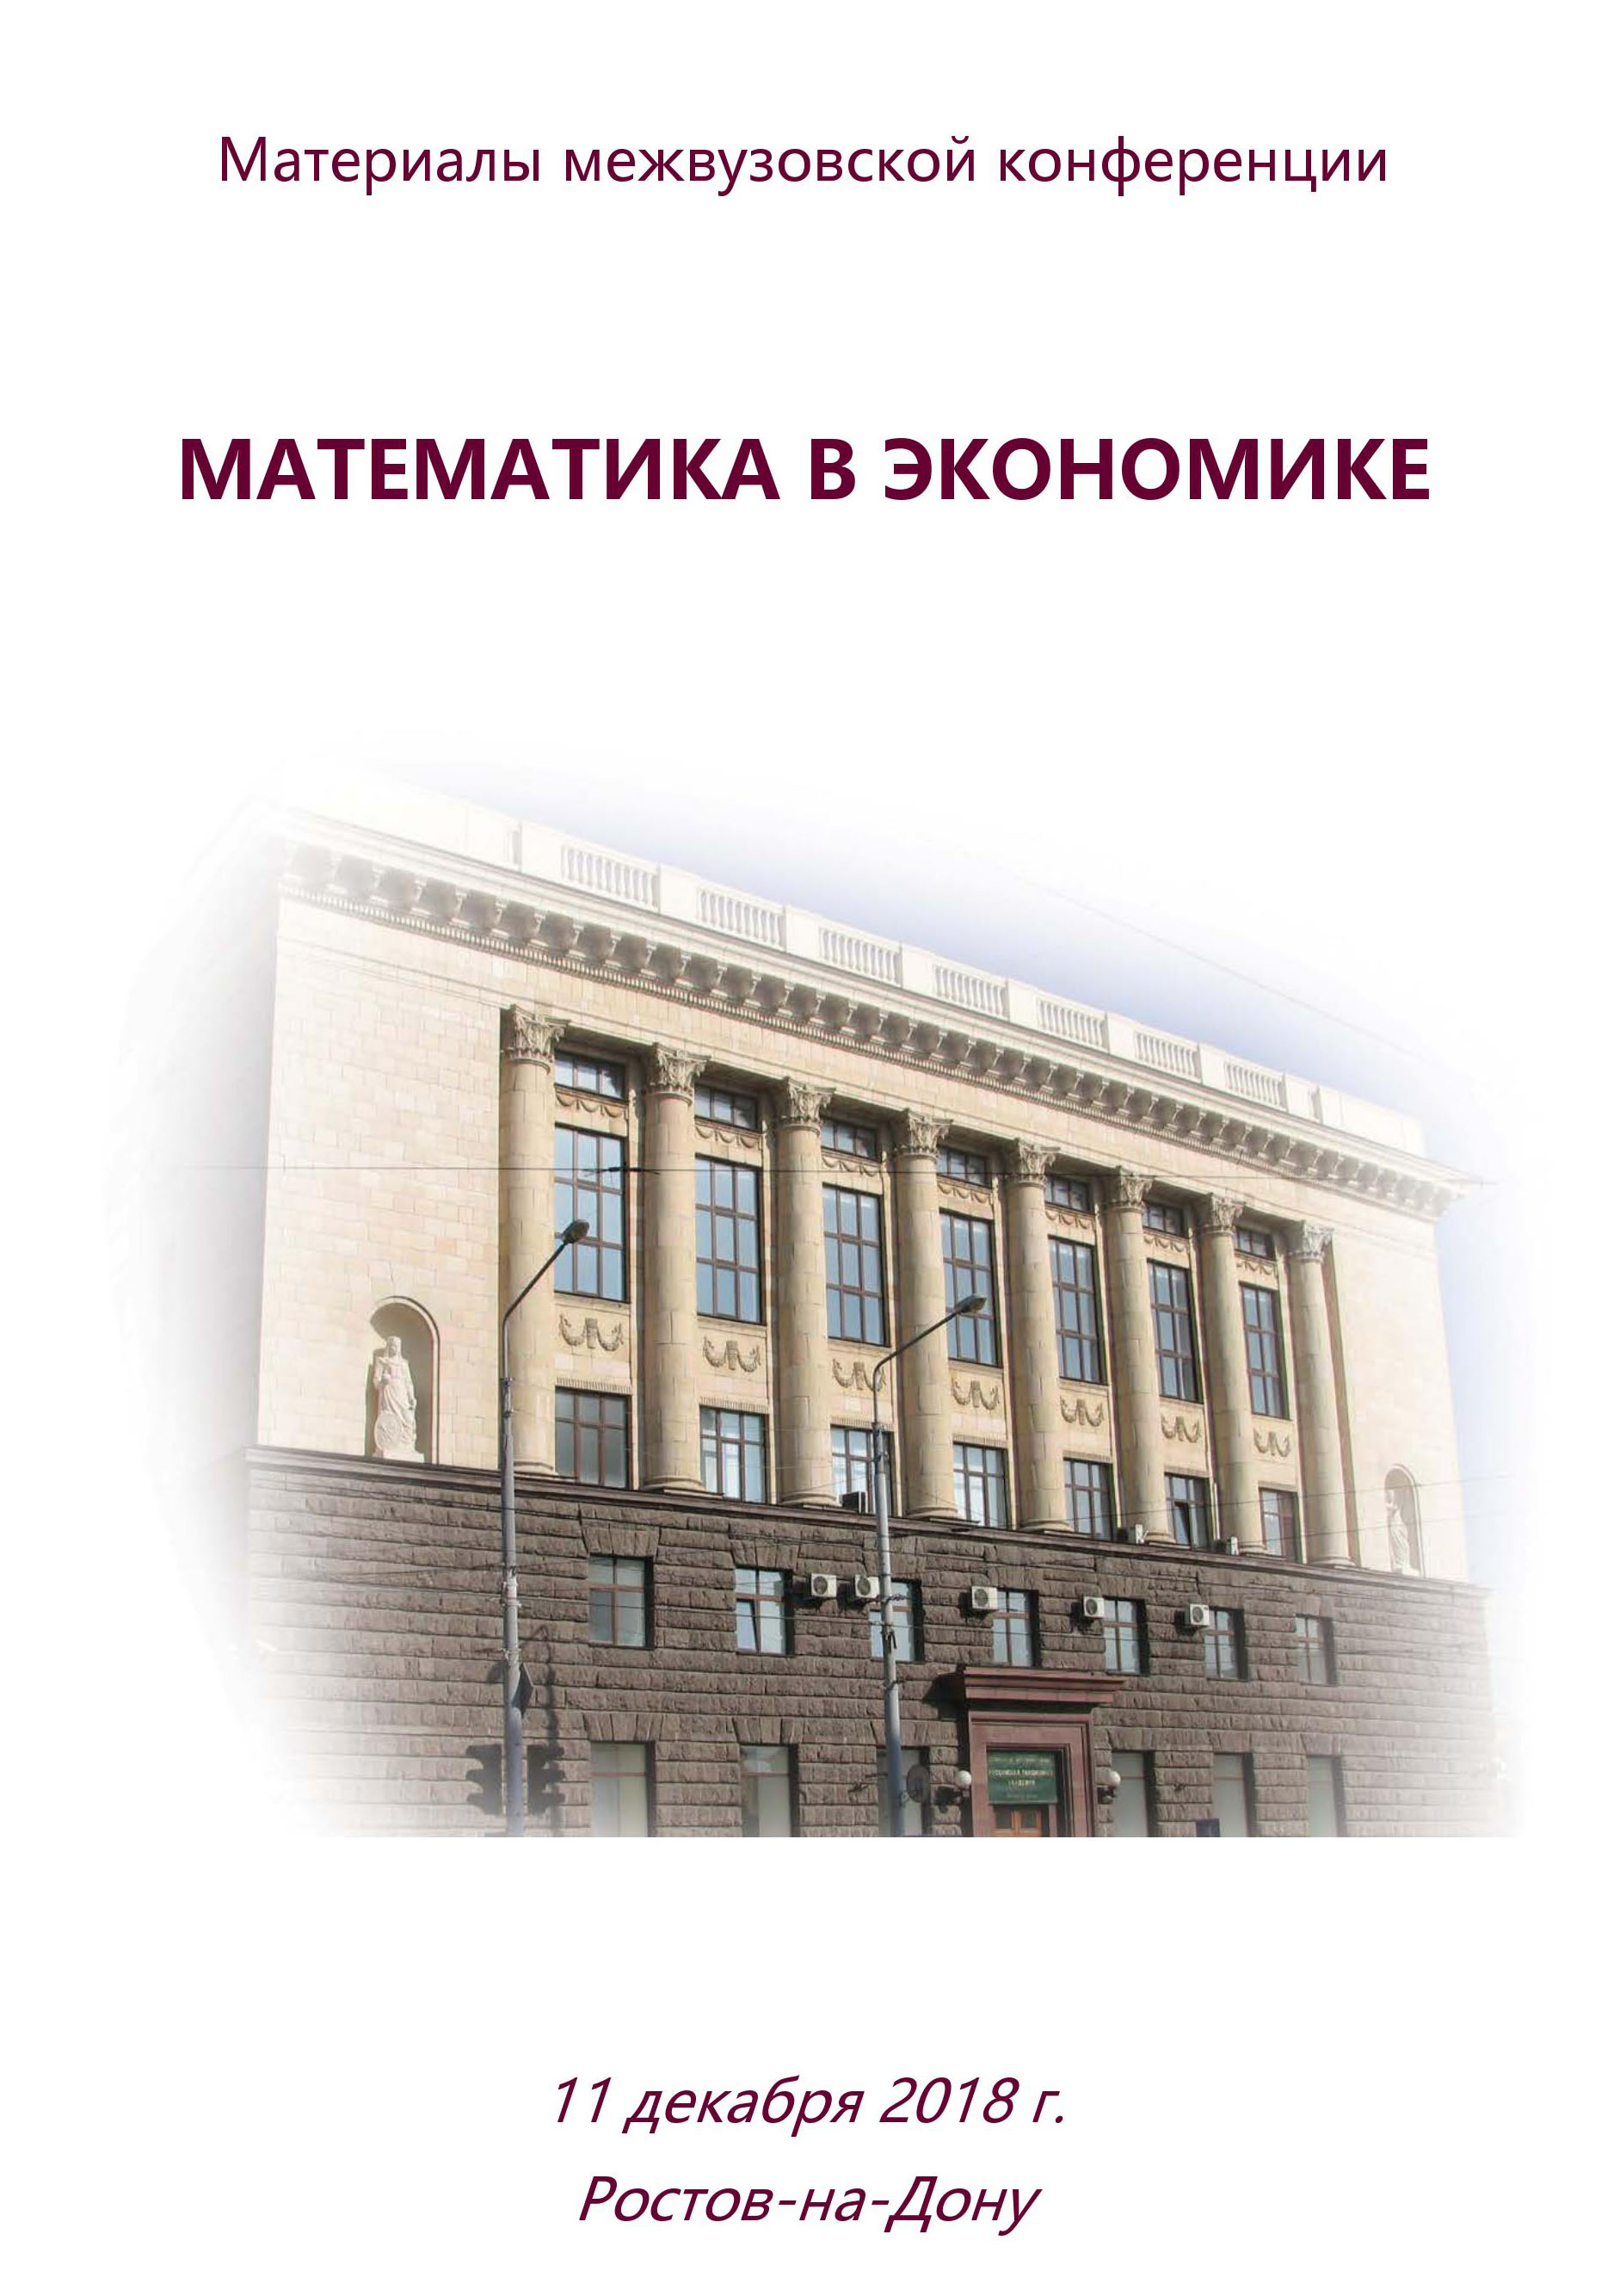                         PROBLEMS OF TRANSITION OF THE RUSSIAN FEDERATION TO THE INFORMATION SOCIETY
            